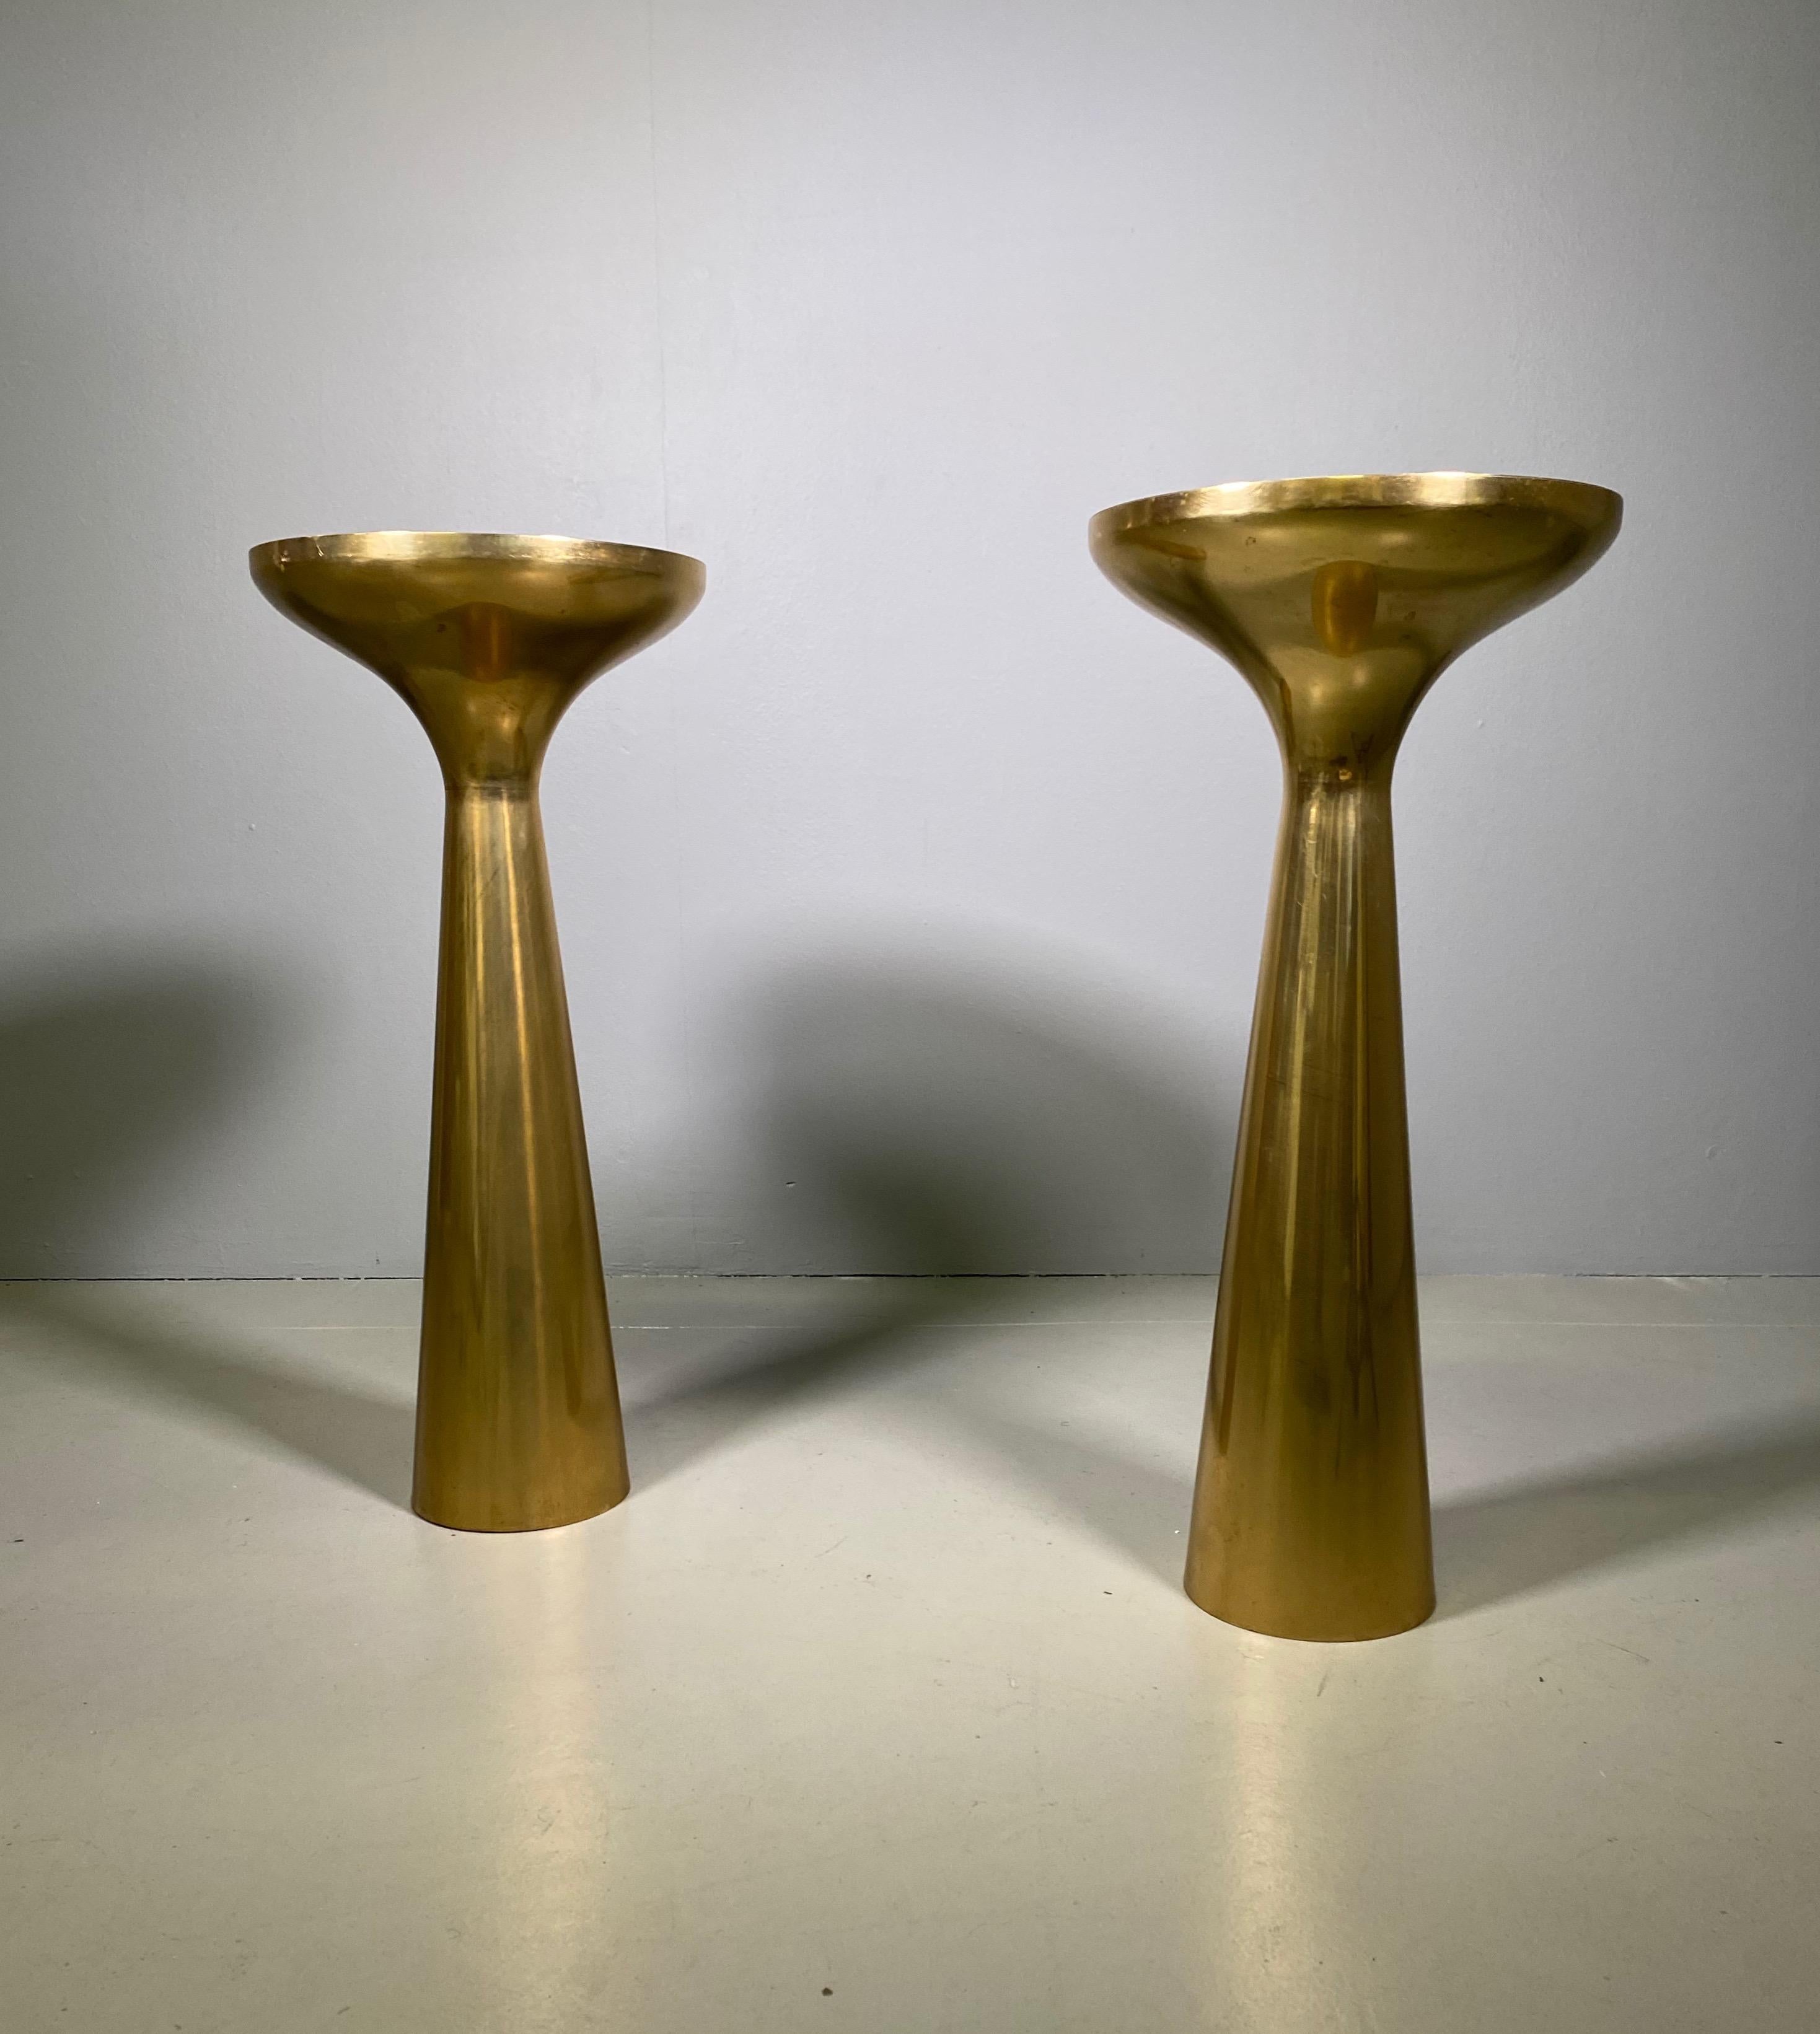 Pair of Italian side table in brass and top glass Mid-Century Modern.